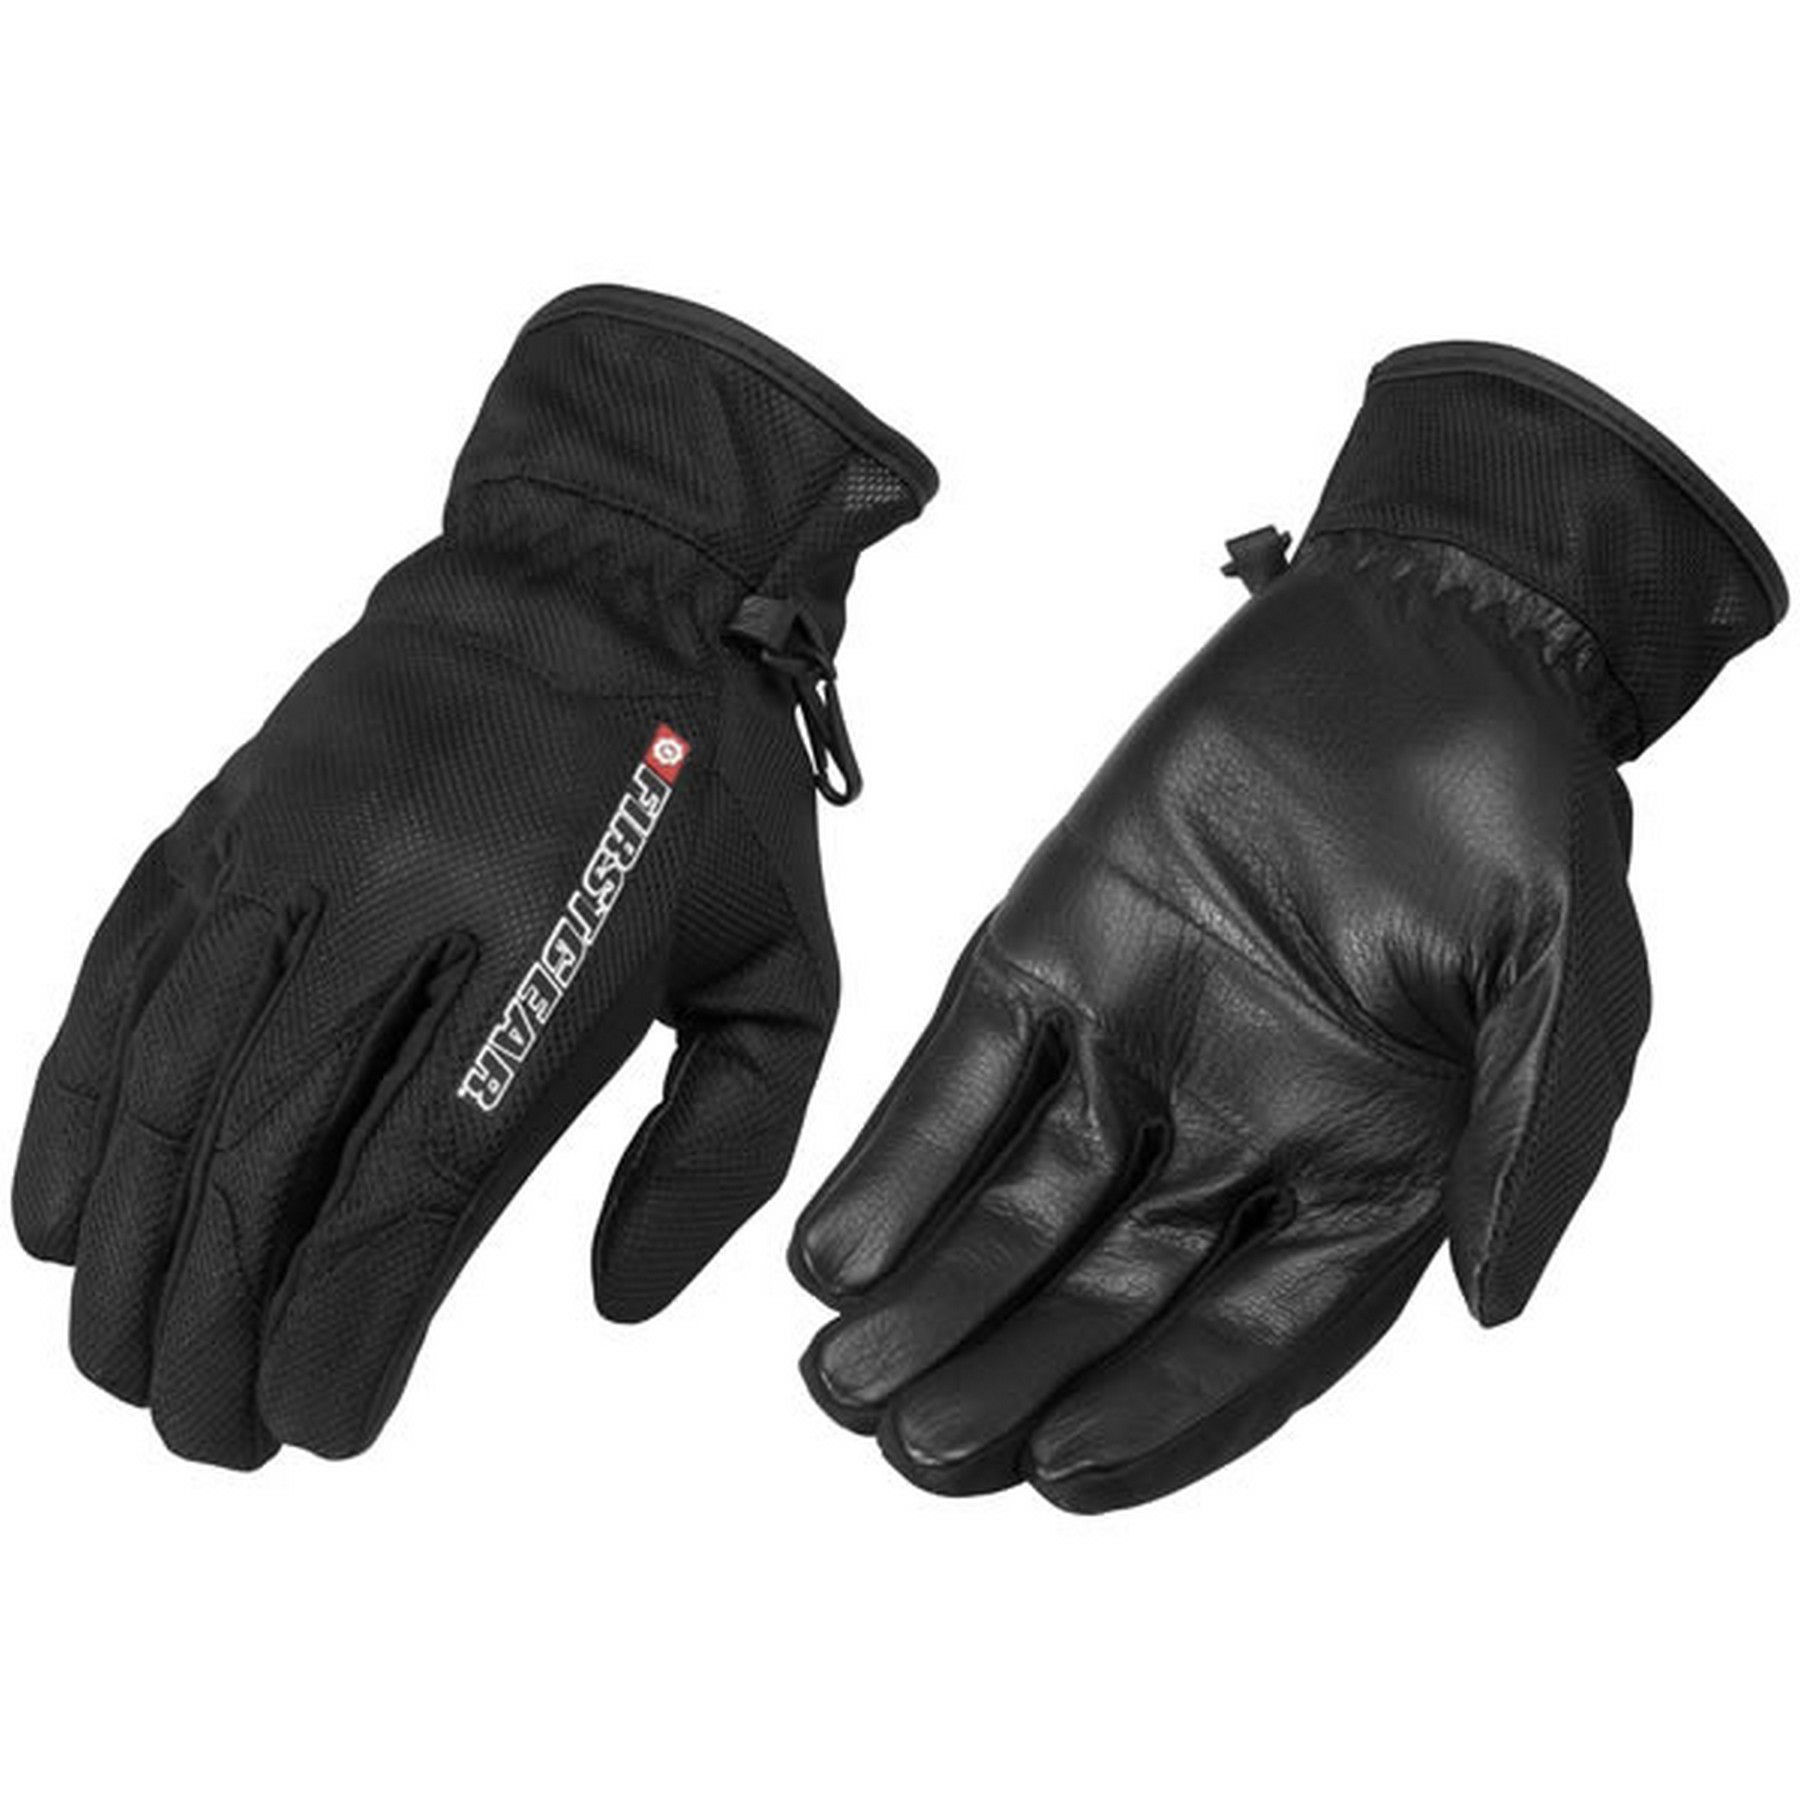 FirstGear Men/'s Rush Air Motorcycle Riding Gloves Black All Sizes